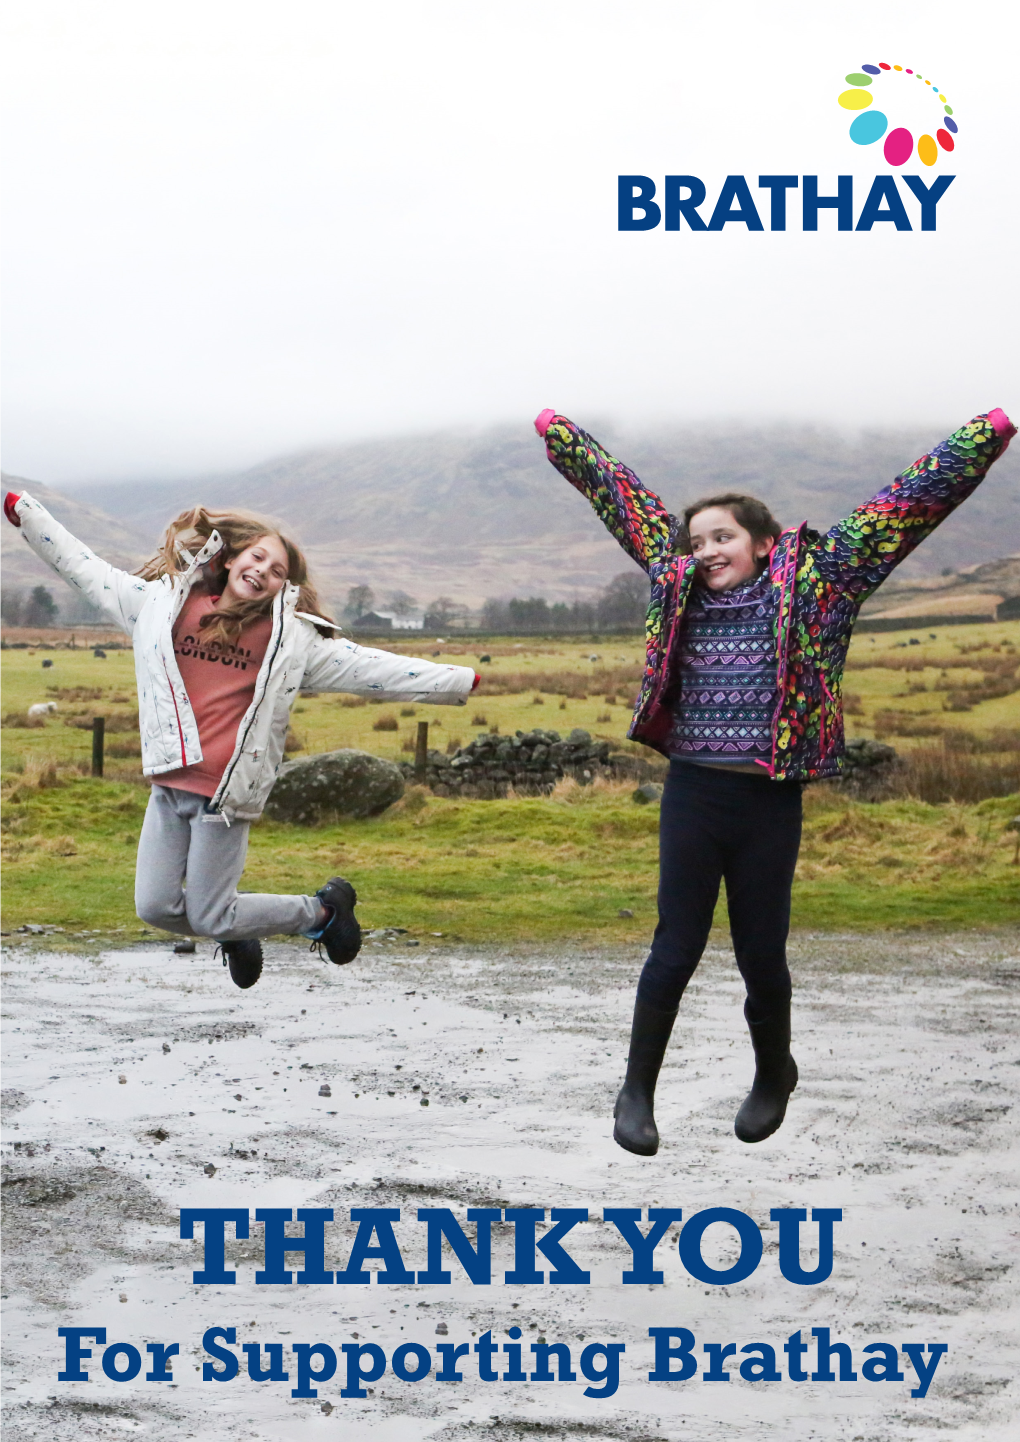 THANK YOU for Supporting Brathay Help Brathay Make a Difference